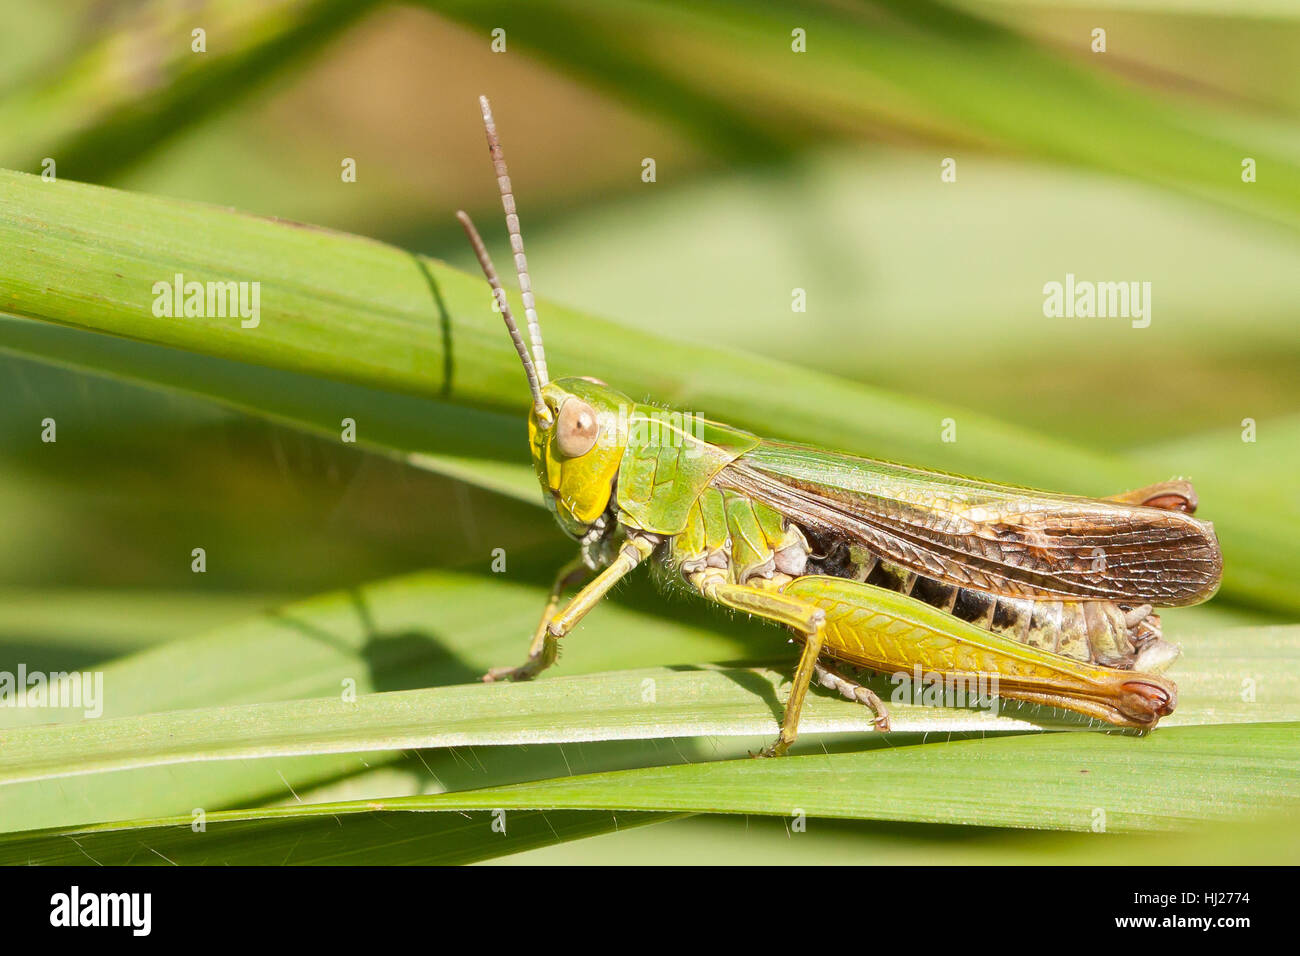 A grasshopper on the grass in Belgium Stock Photo